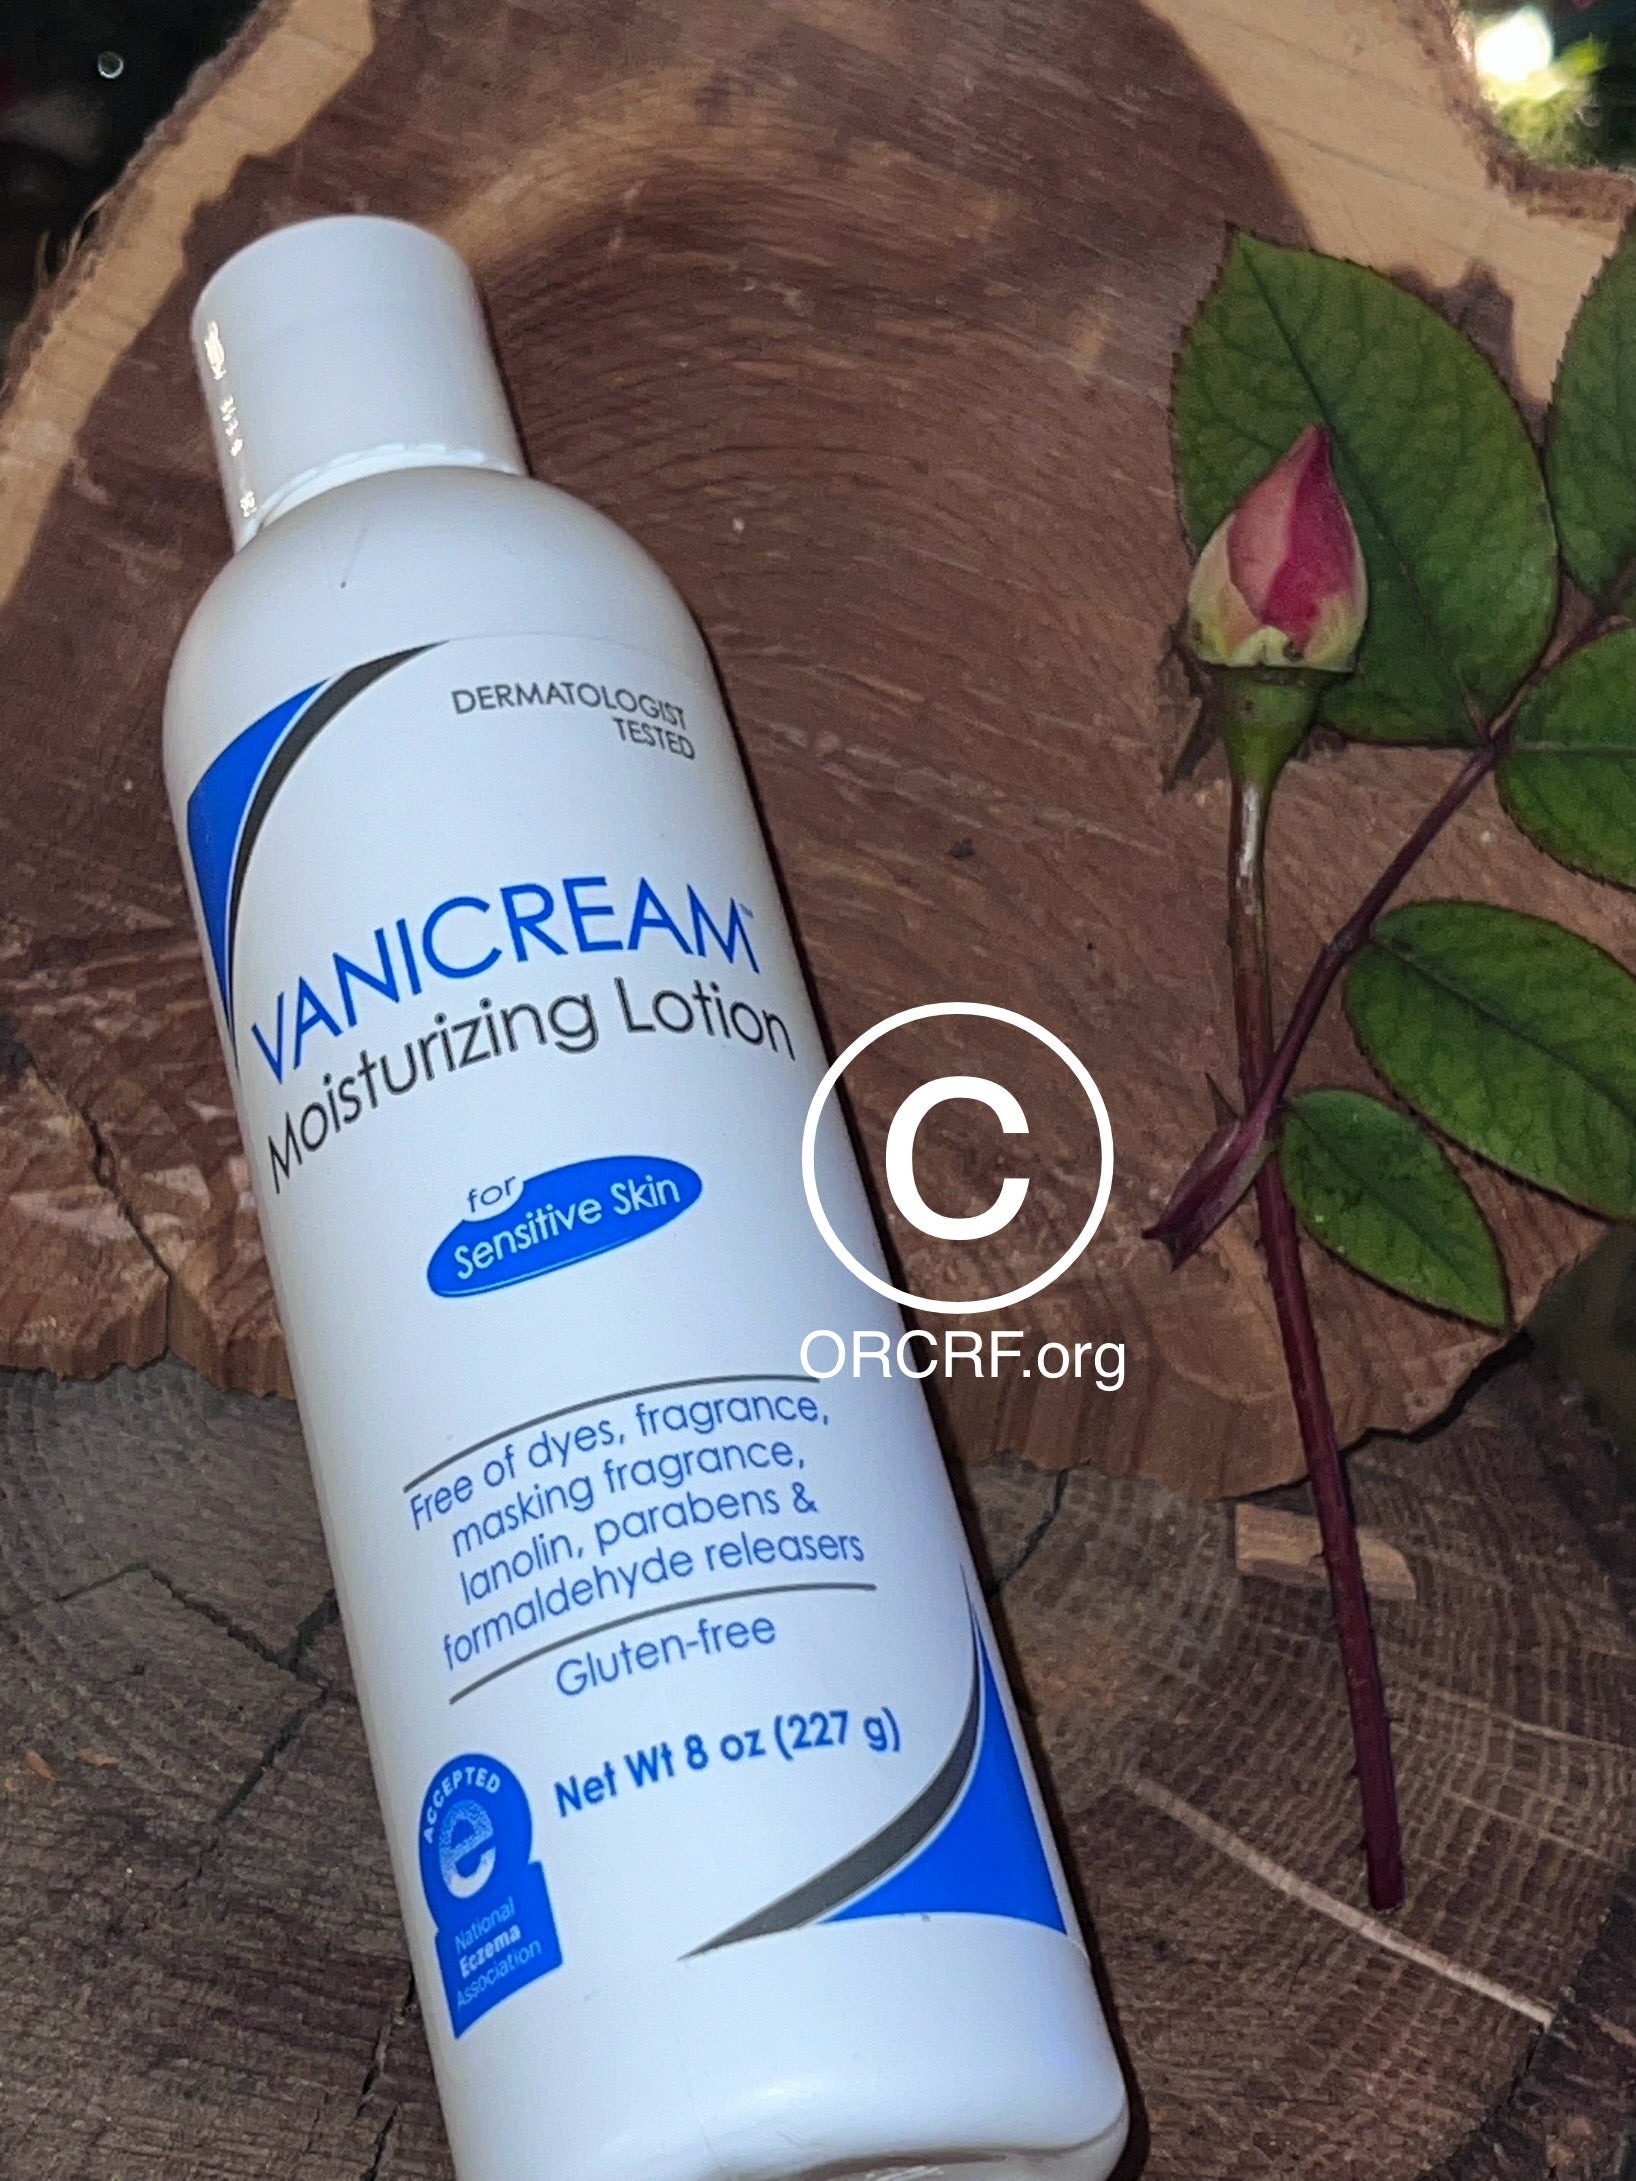 Vanicream MOISTURIZING SKIN LITE LOTION for SENSITIVE SKIN 8oz Ounce 227g - Supporting ORCRF.org